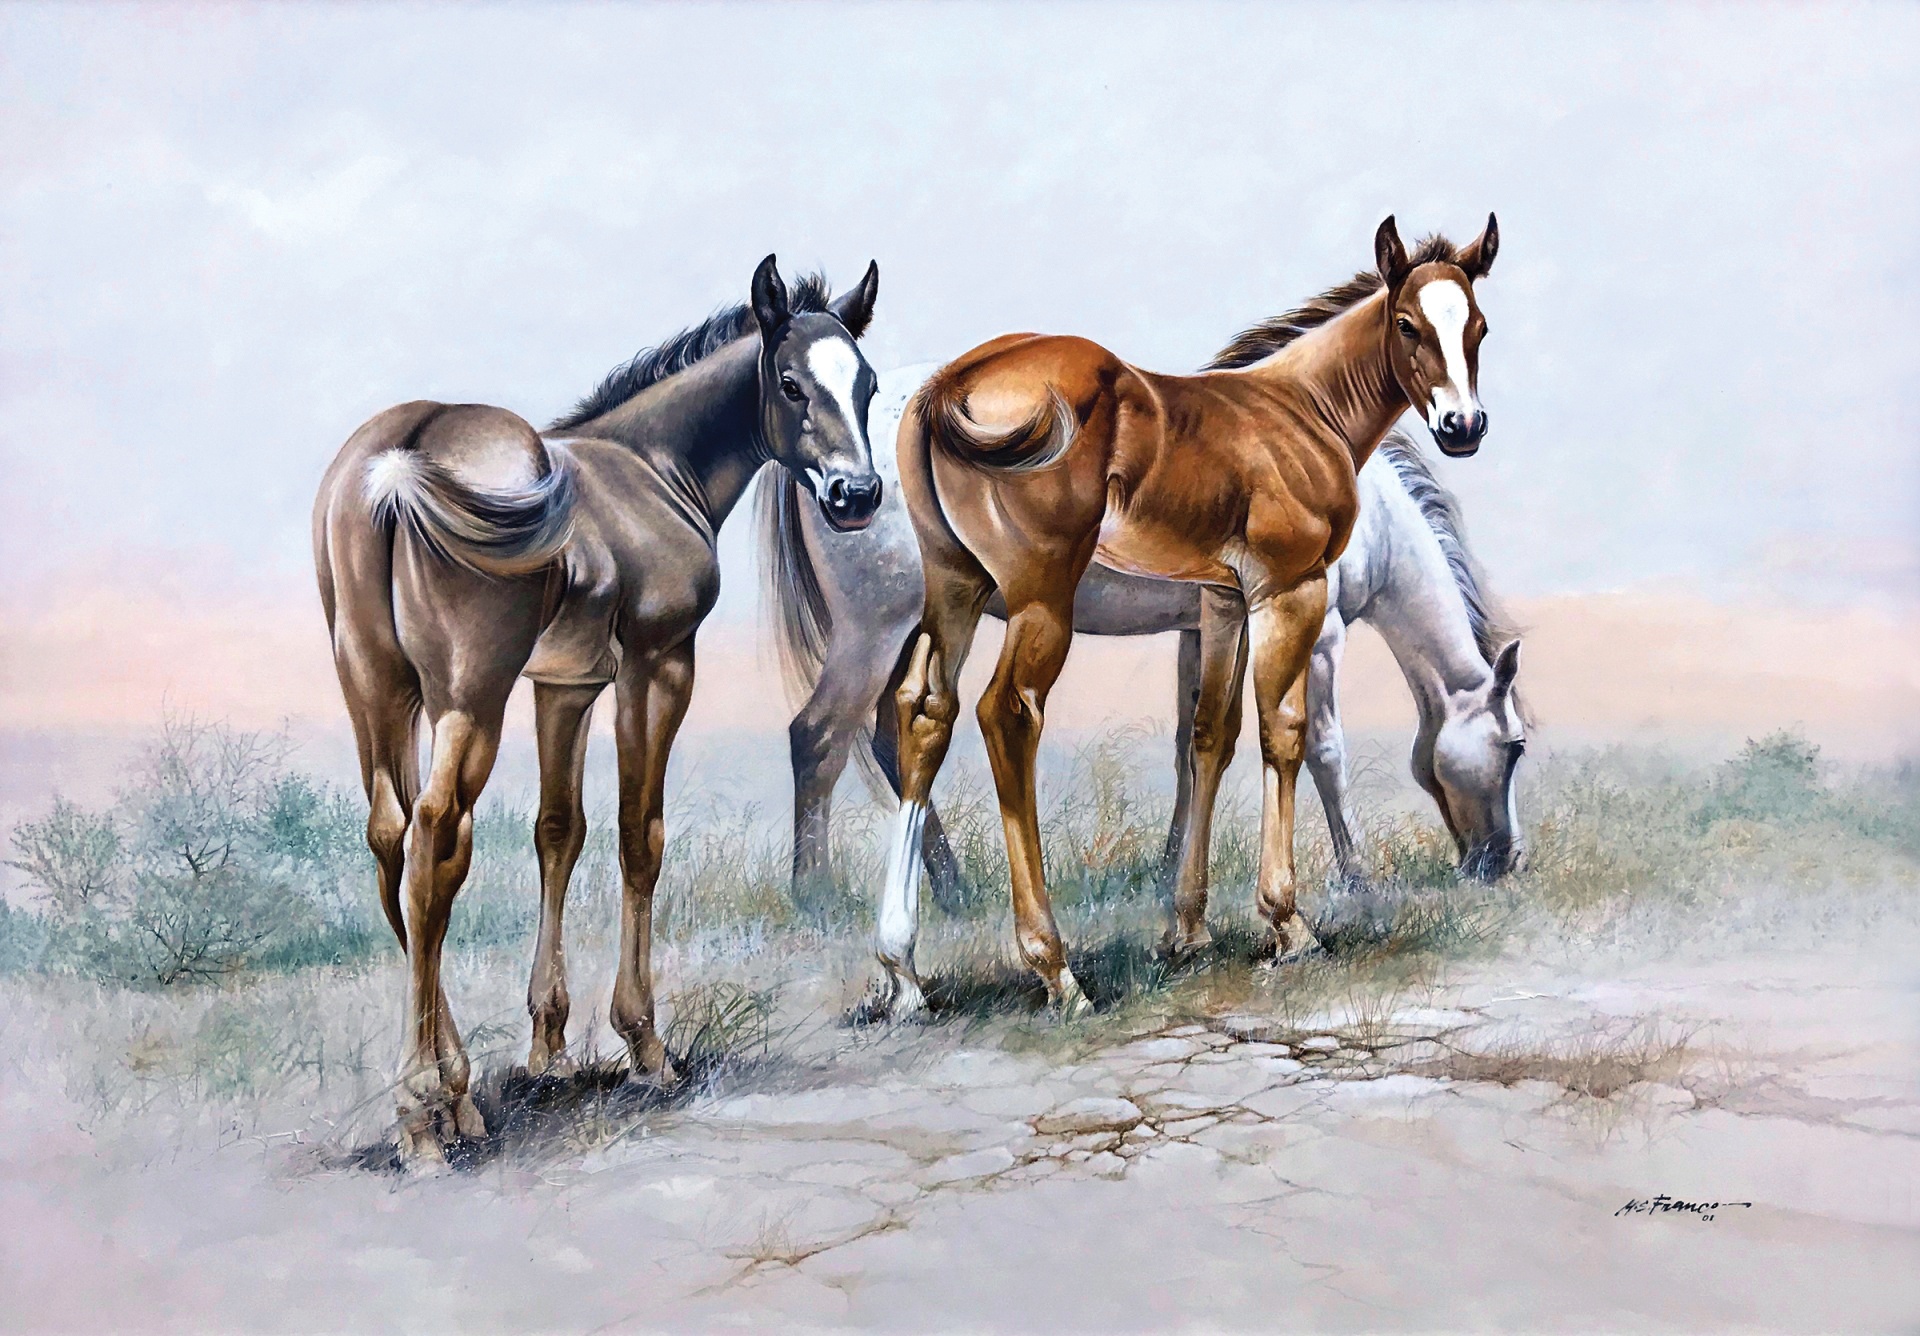 " Pair of Aces "
Image size 27 x 38 1/2"
Oil on Linen